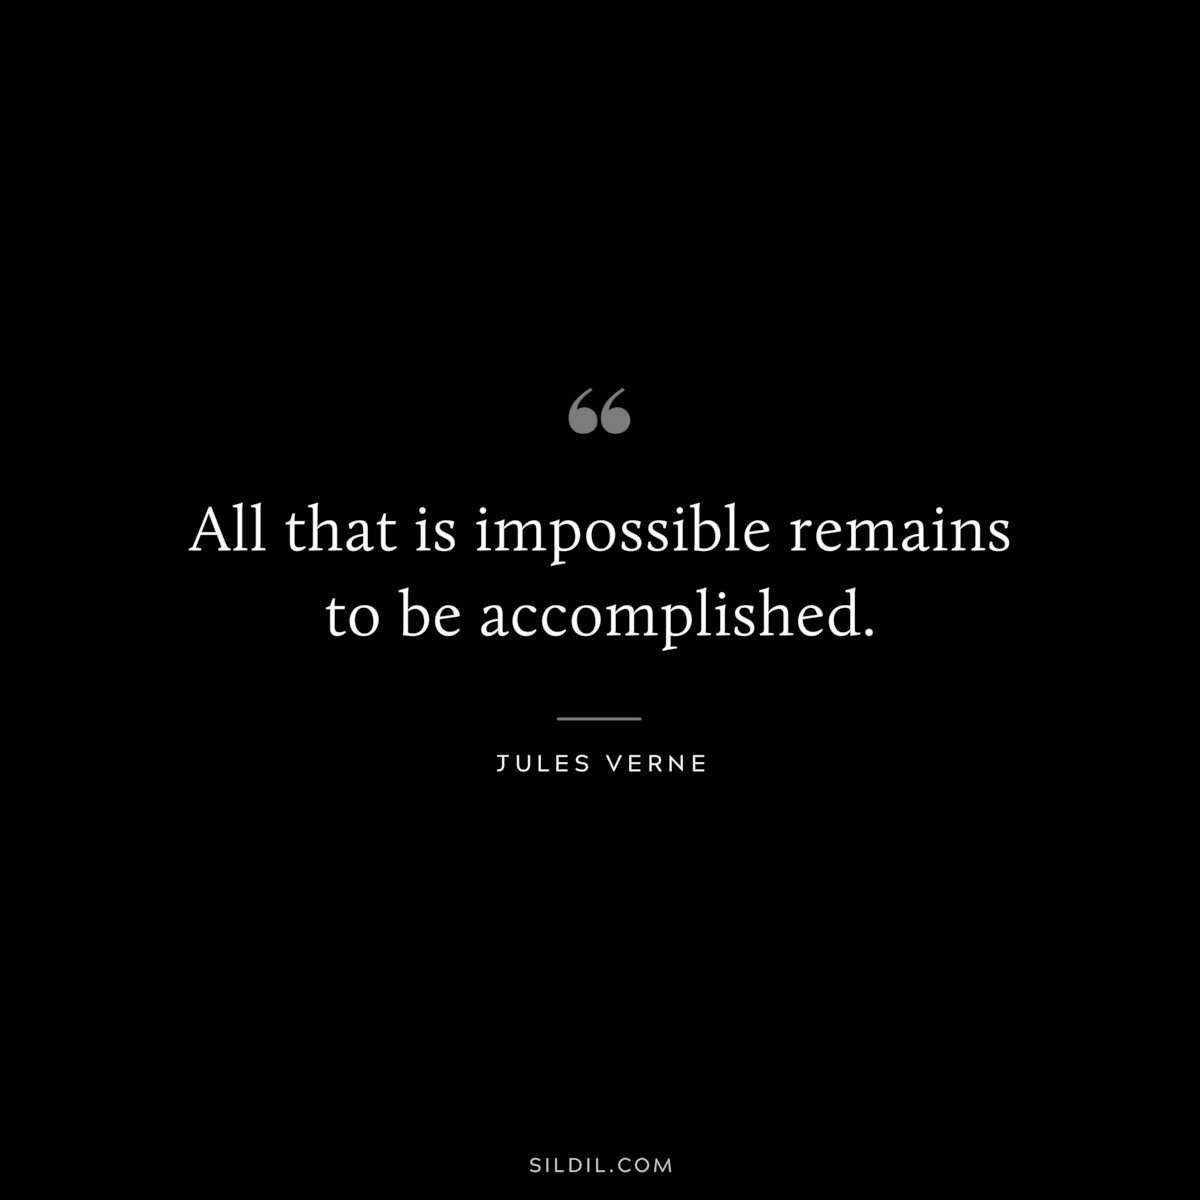 All that is impossible remains to be accomplished.